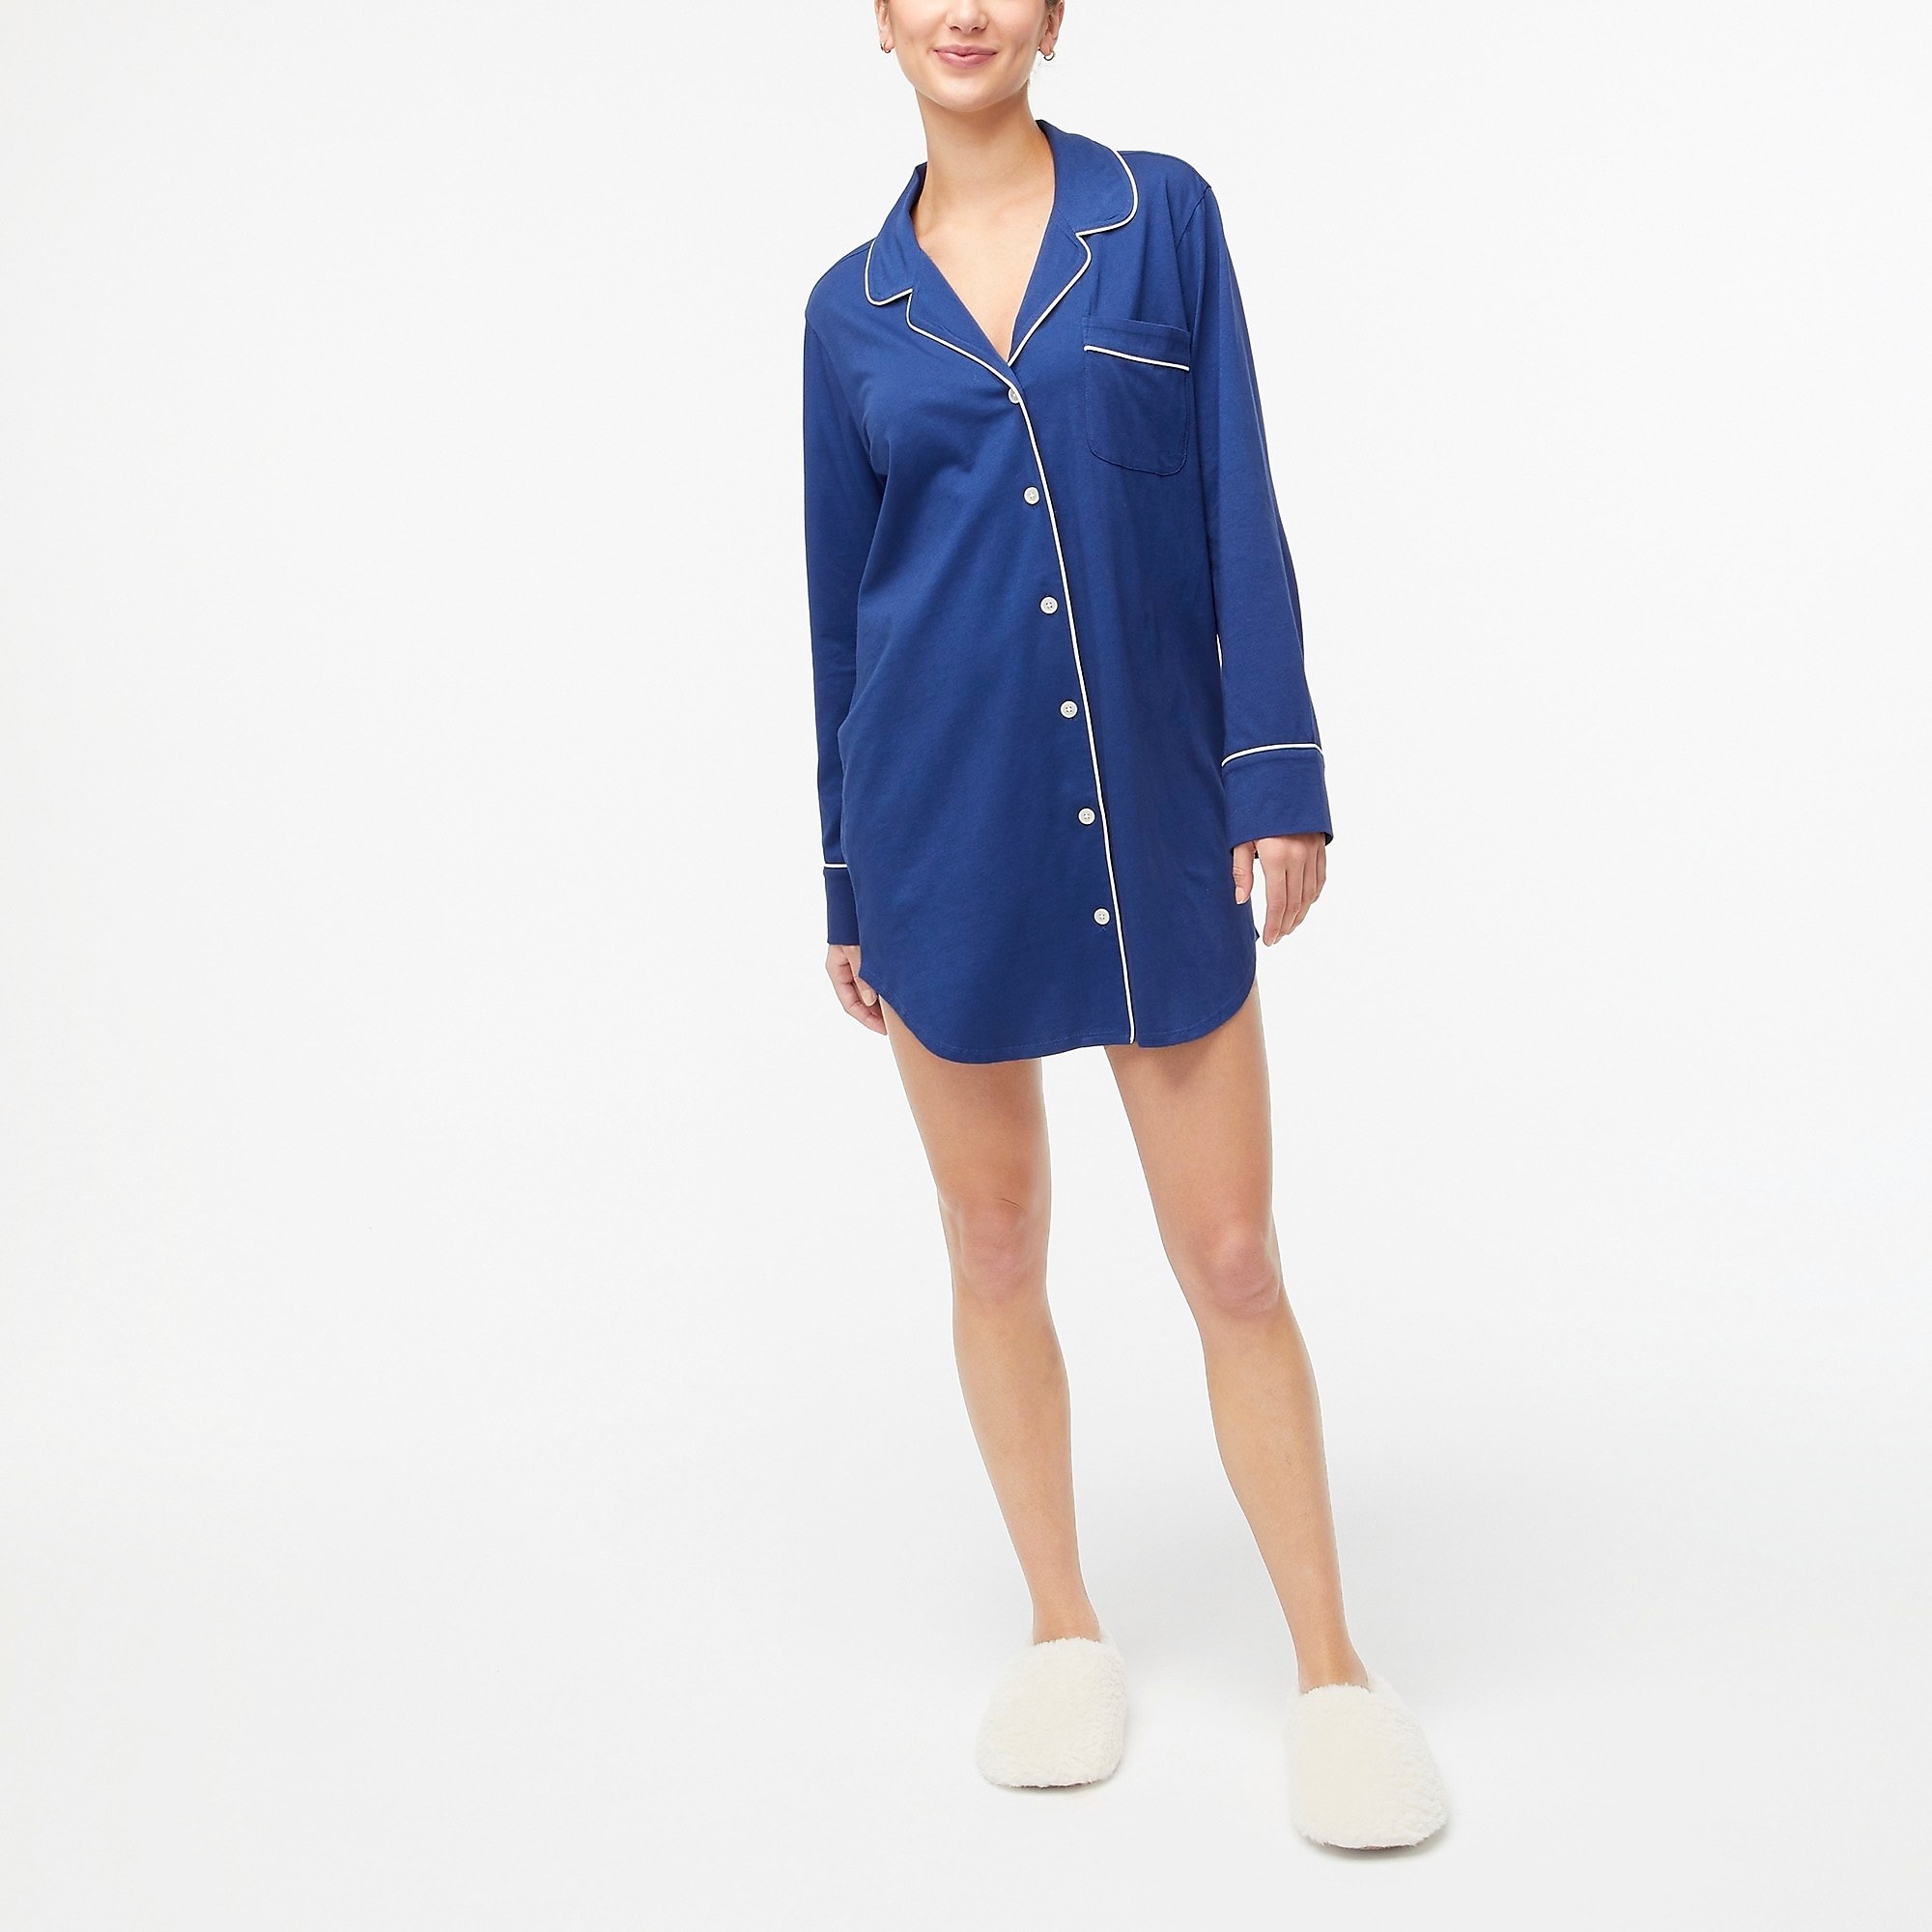 Model wearing a blue button-down nightgown with buttons